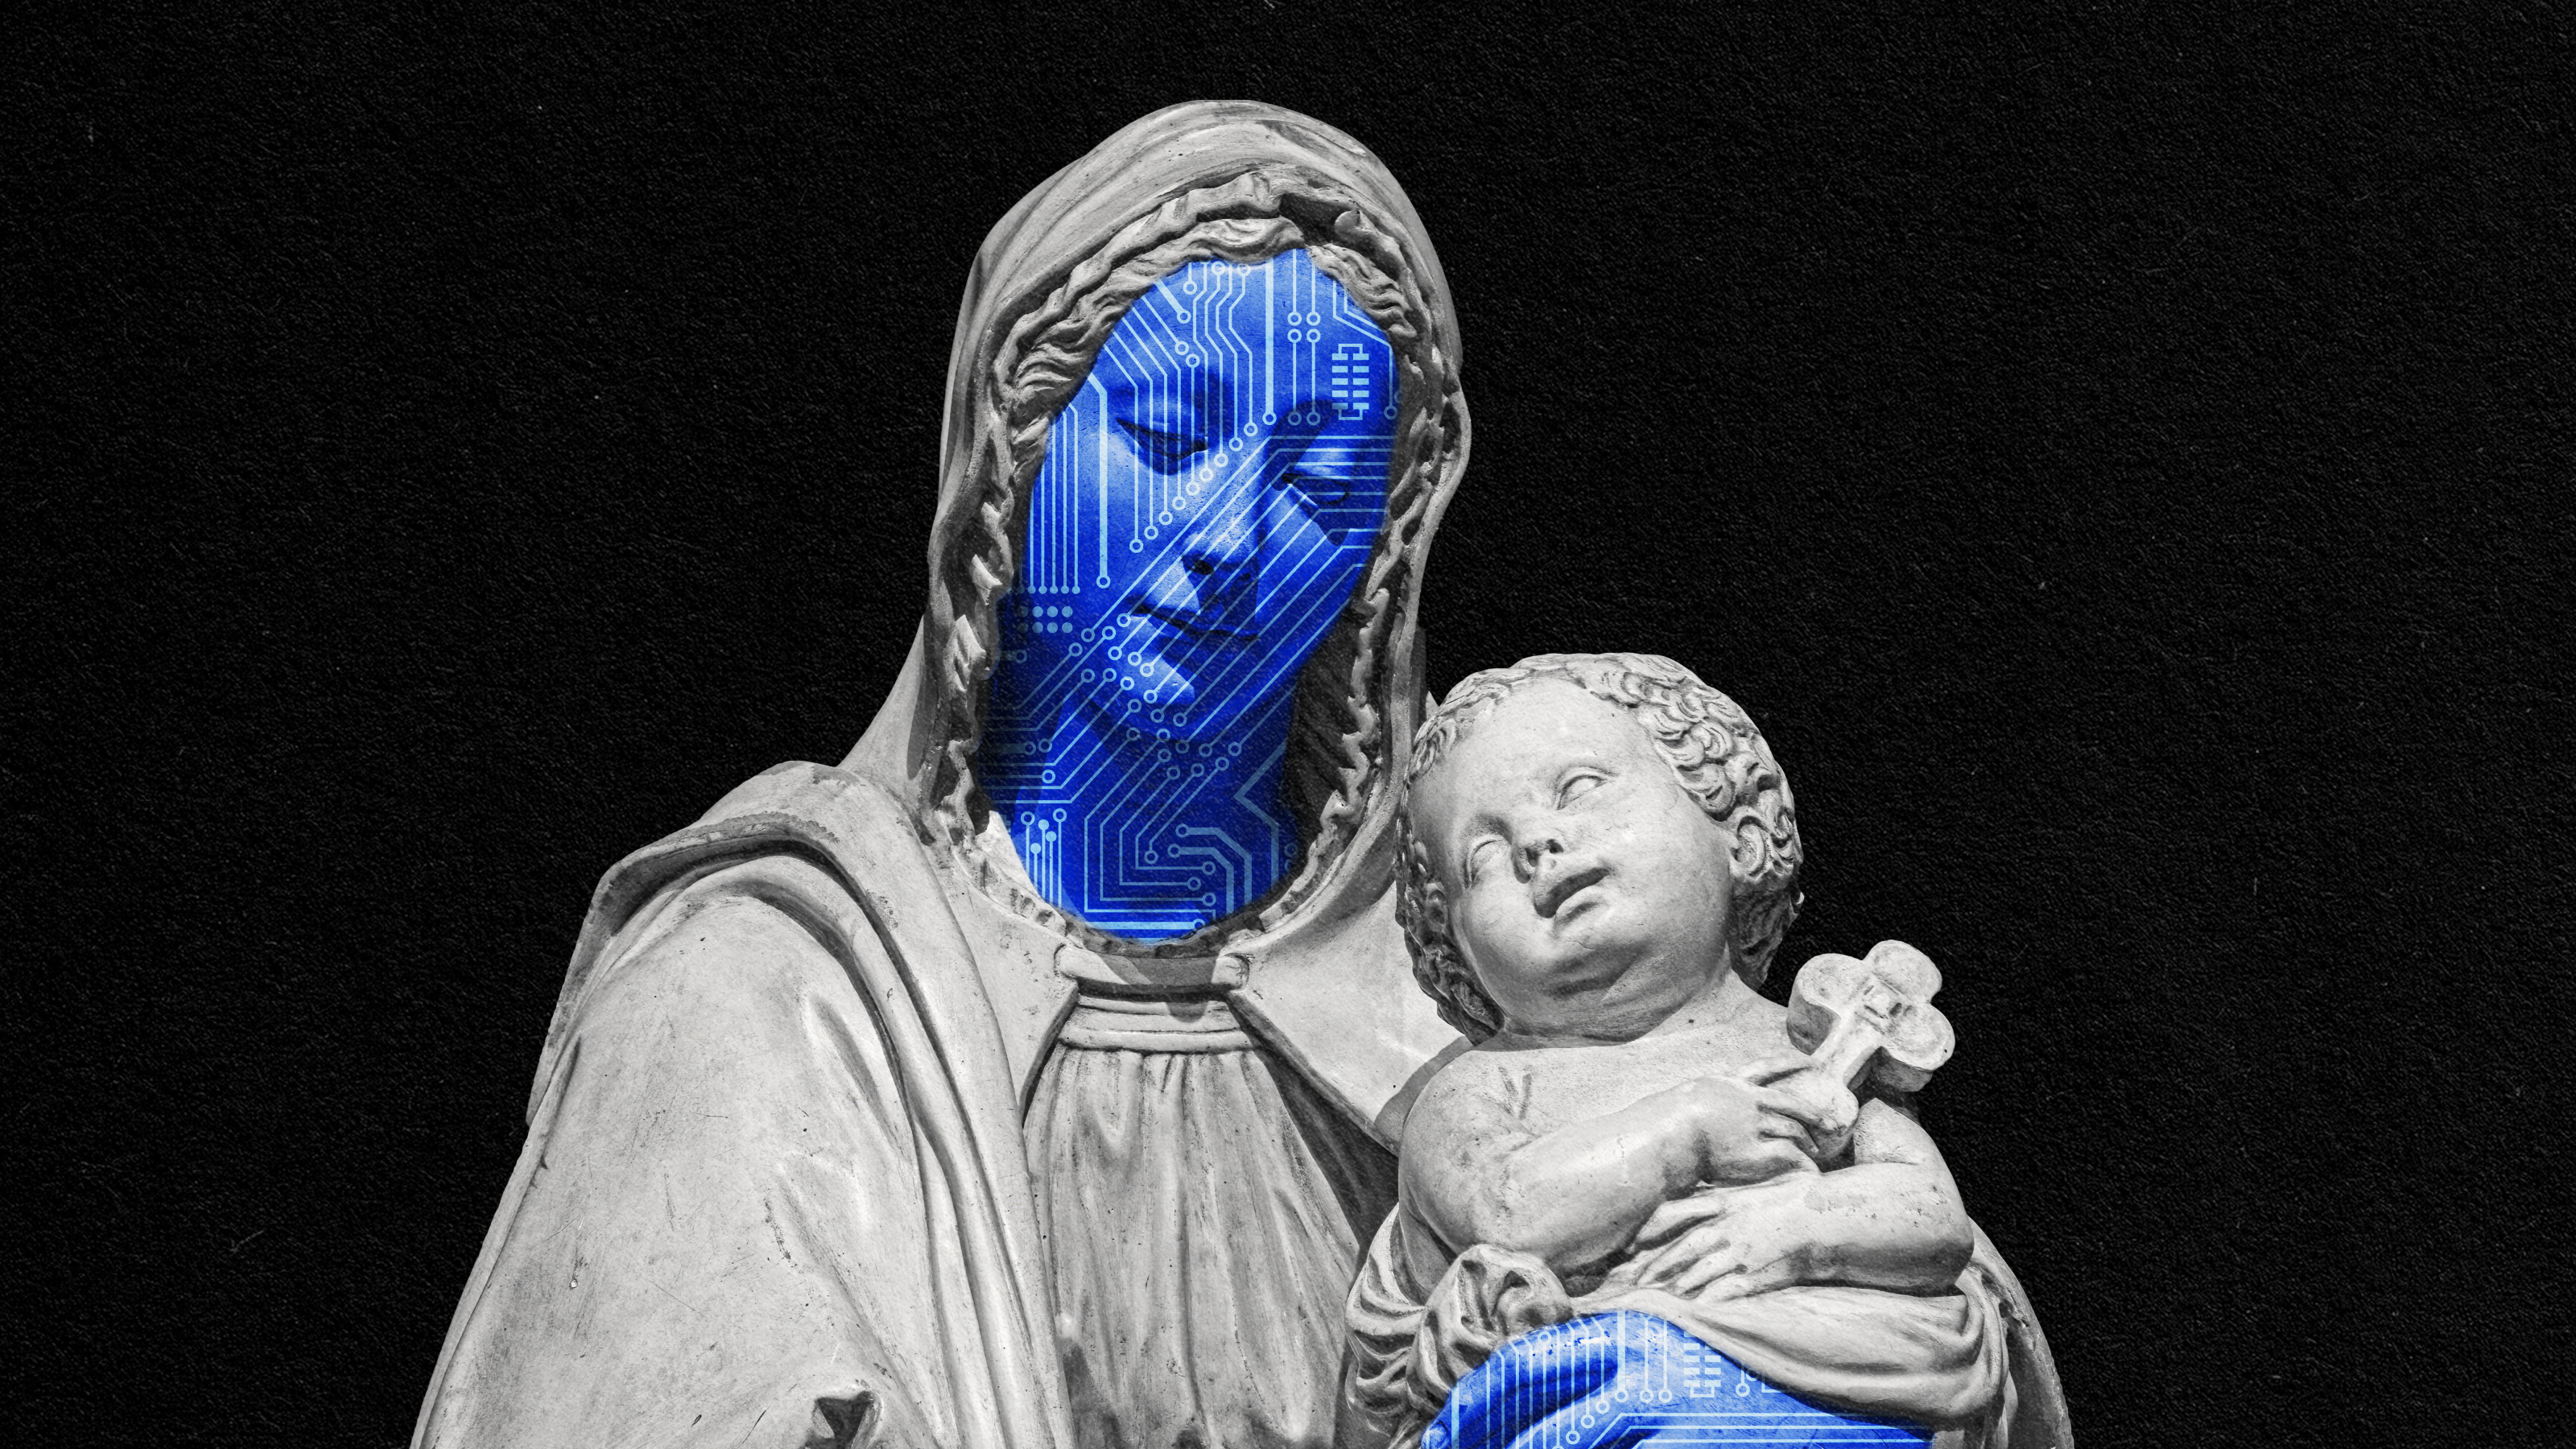 A declining religious statue of Mary holding a blue baby.